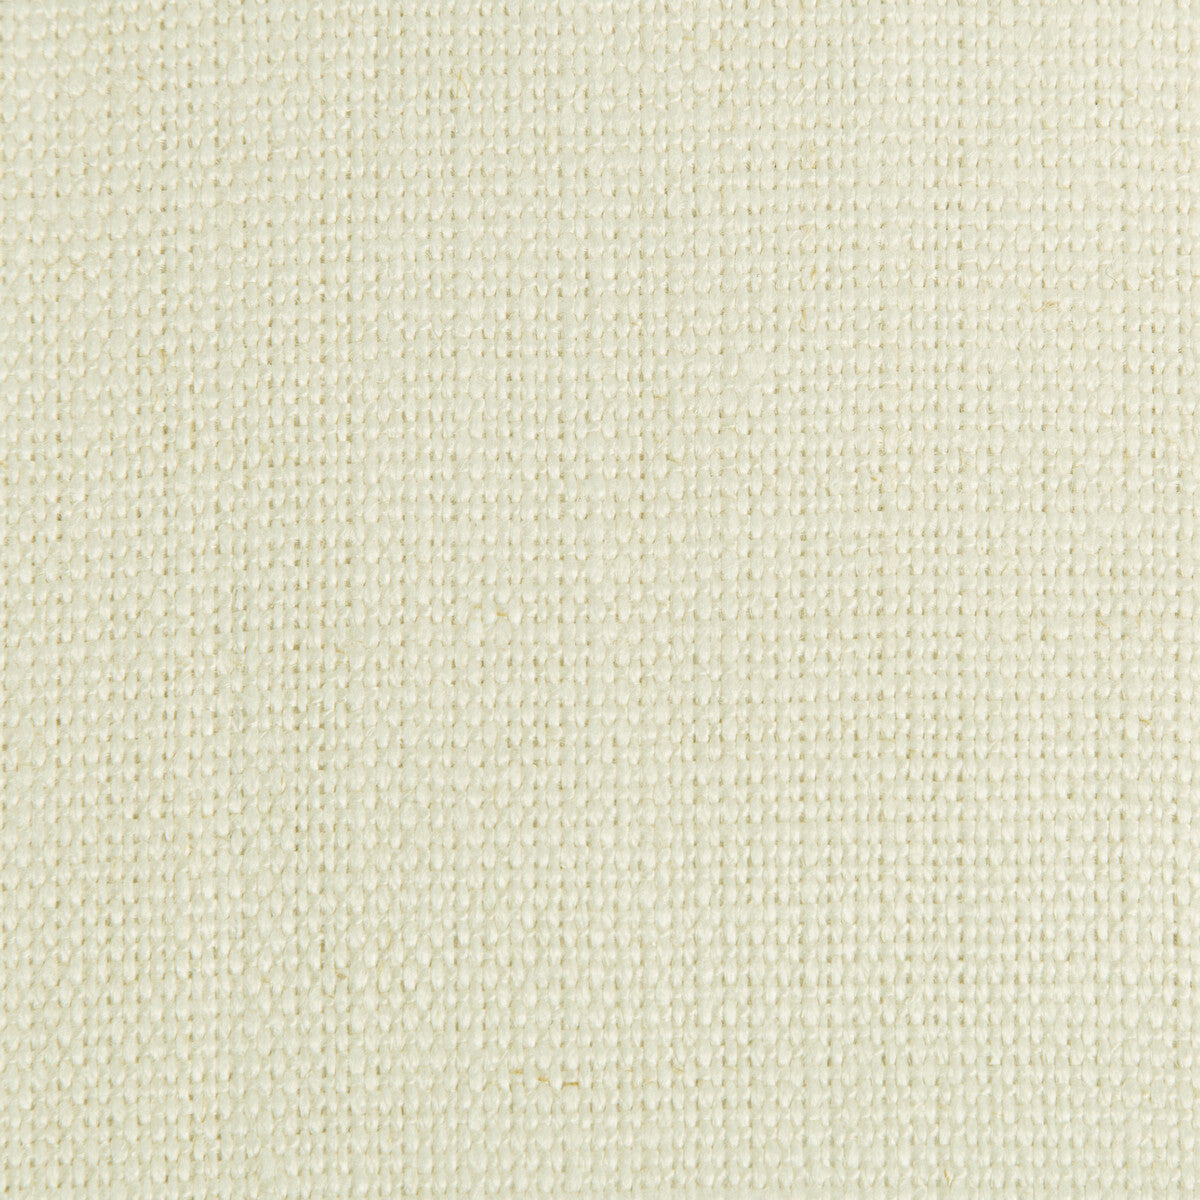 Hampton Linen fabric in cotton ball color - pattern 2012171.1001.0 - by Lee Jofa in the Colour Complements II collection